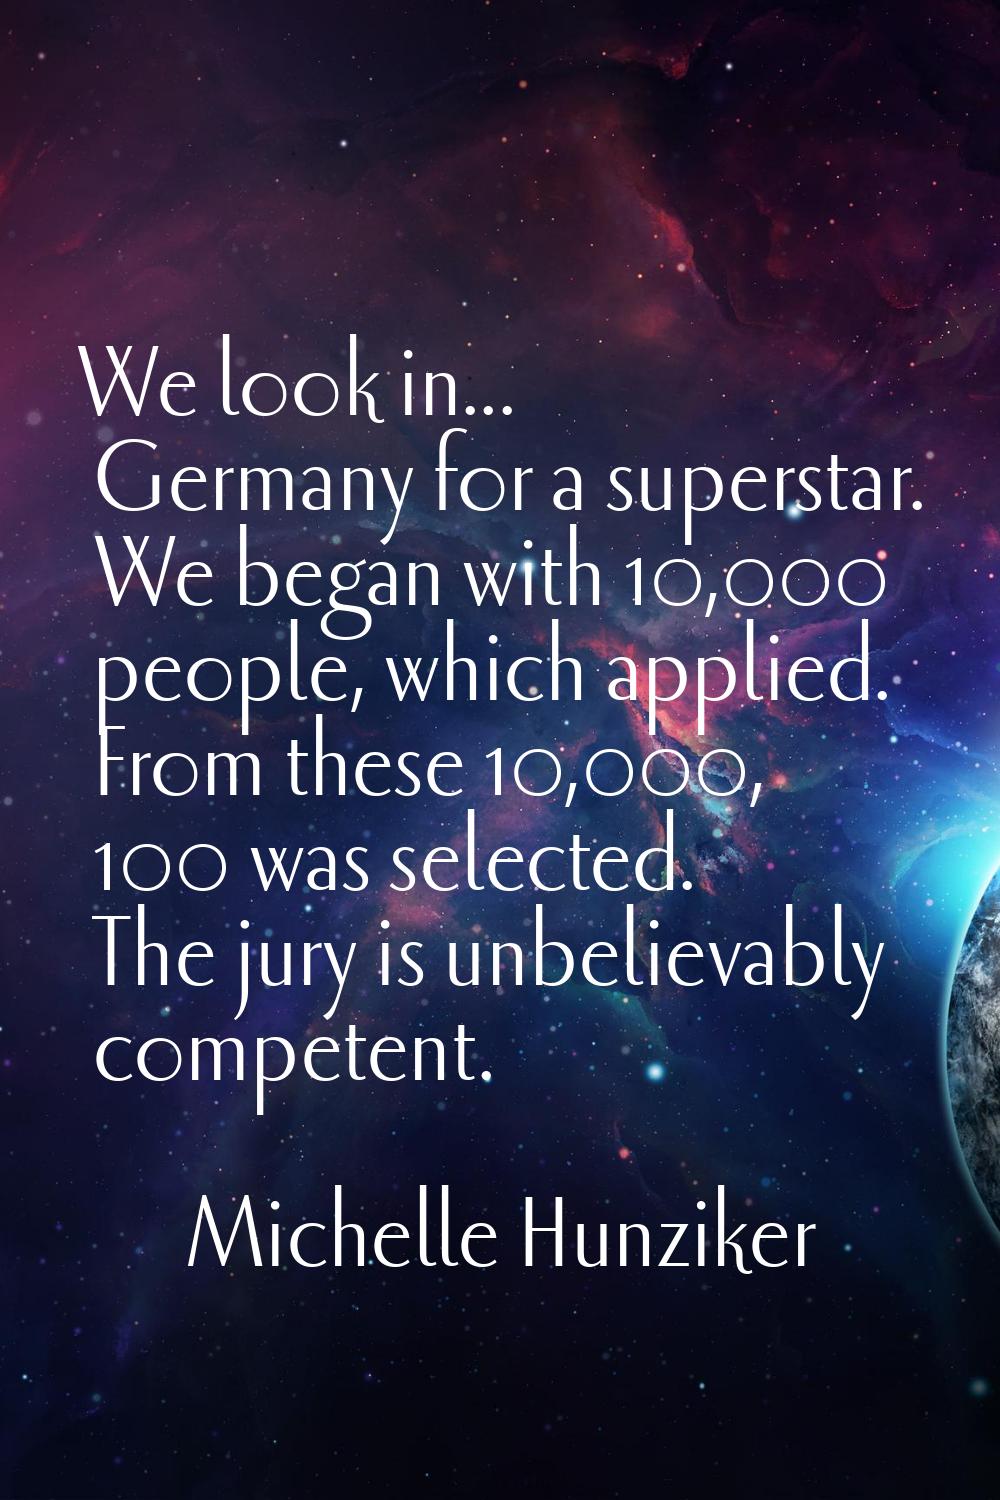 We look in... Germany for a superstar. We began with 10,000 people, which applied. From these 10,00